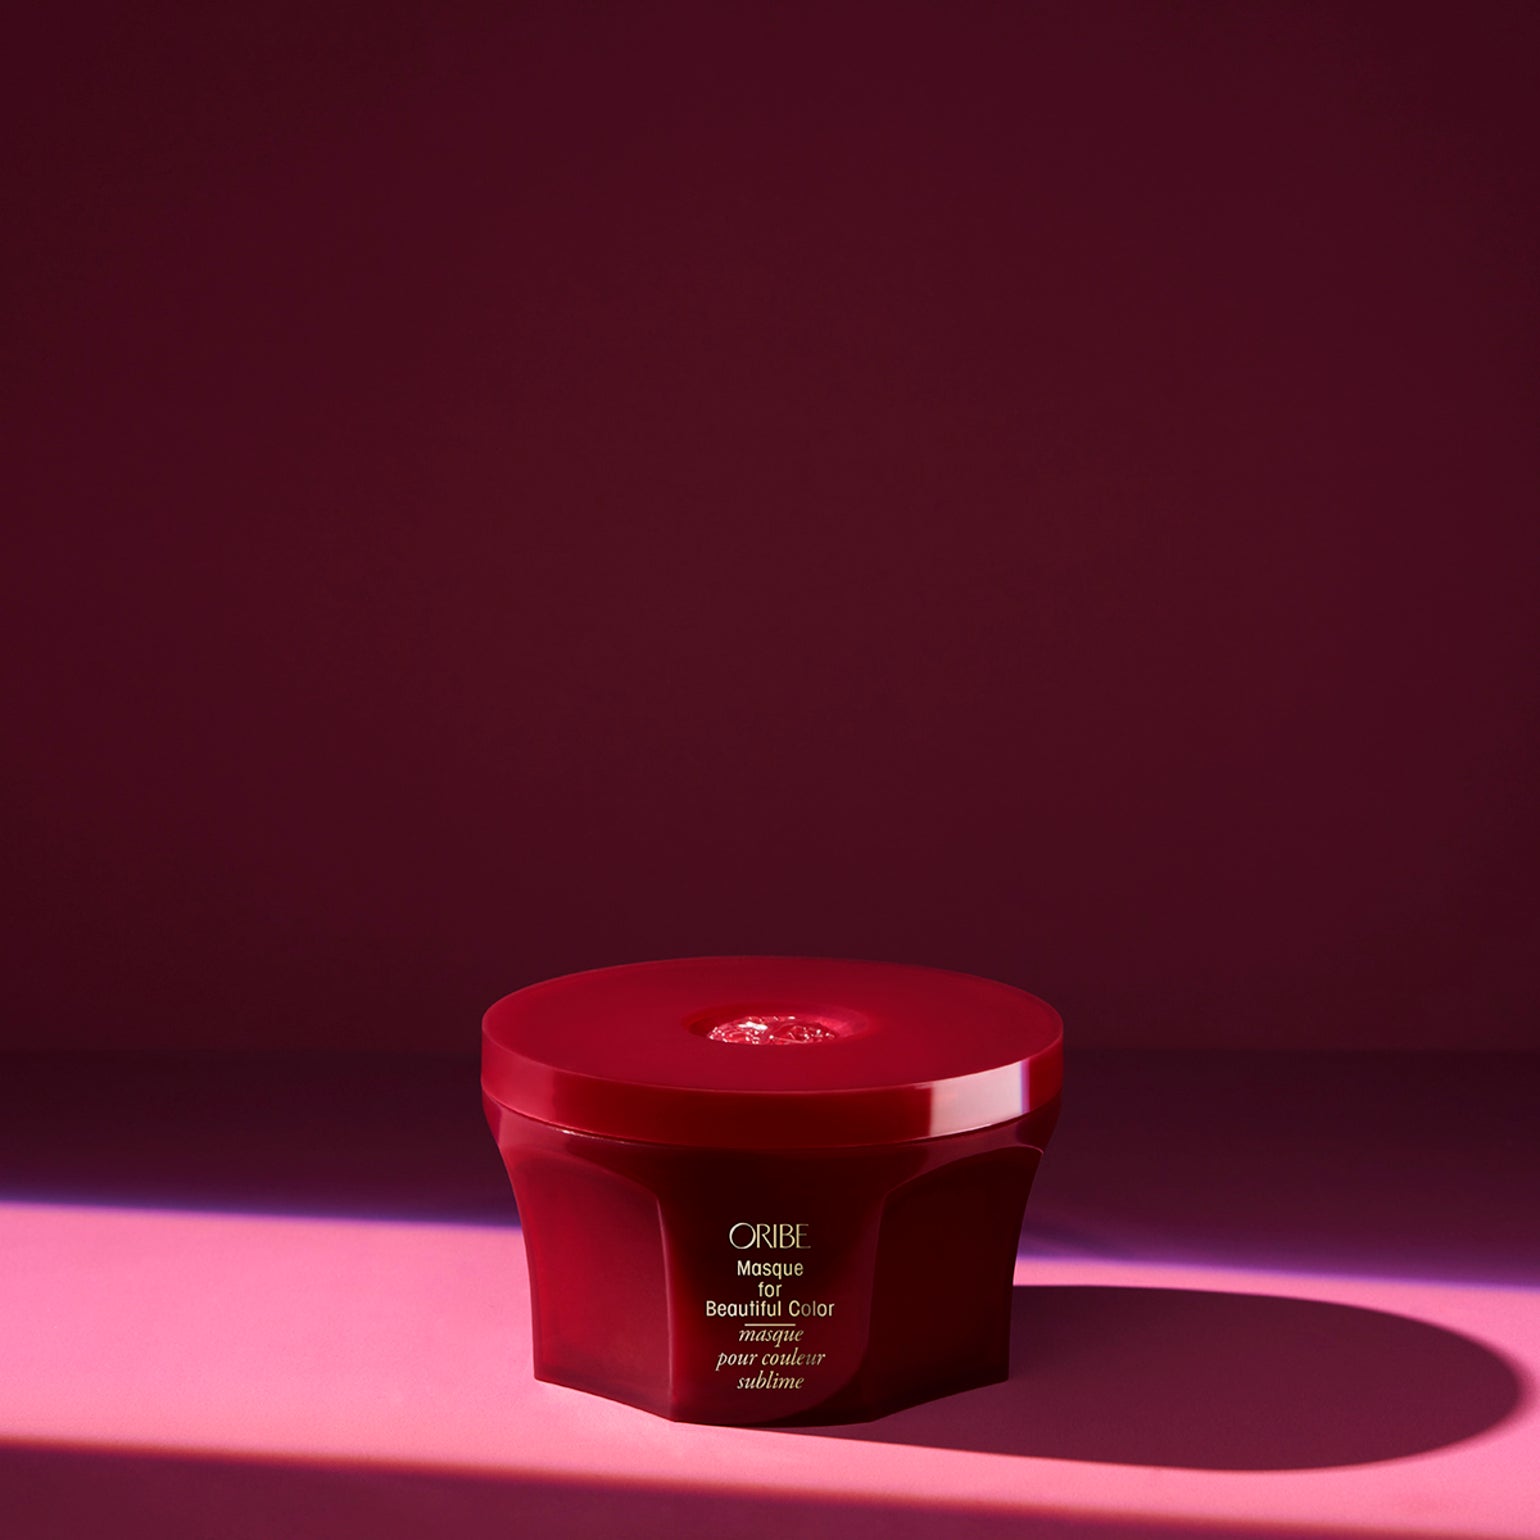 Masque for Beautiful Color - Oribe Hair Care